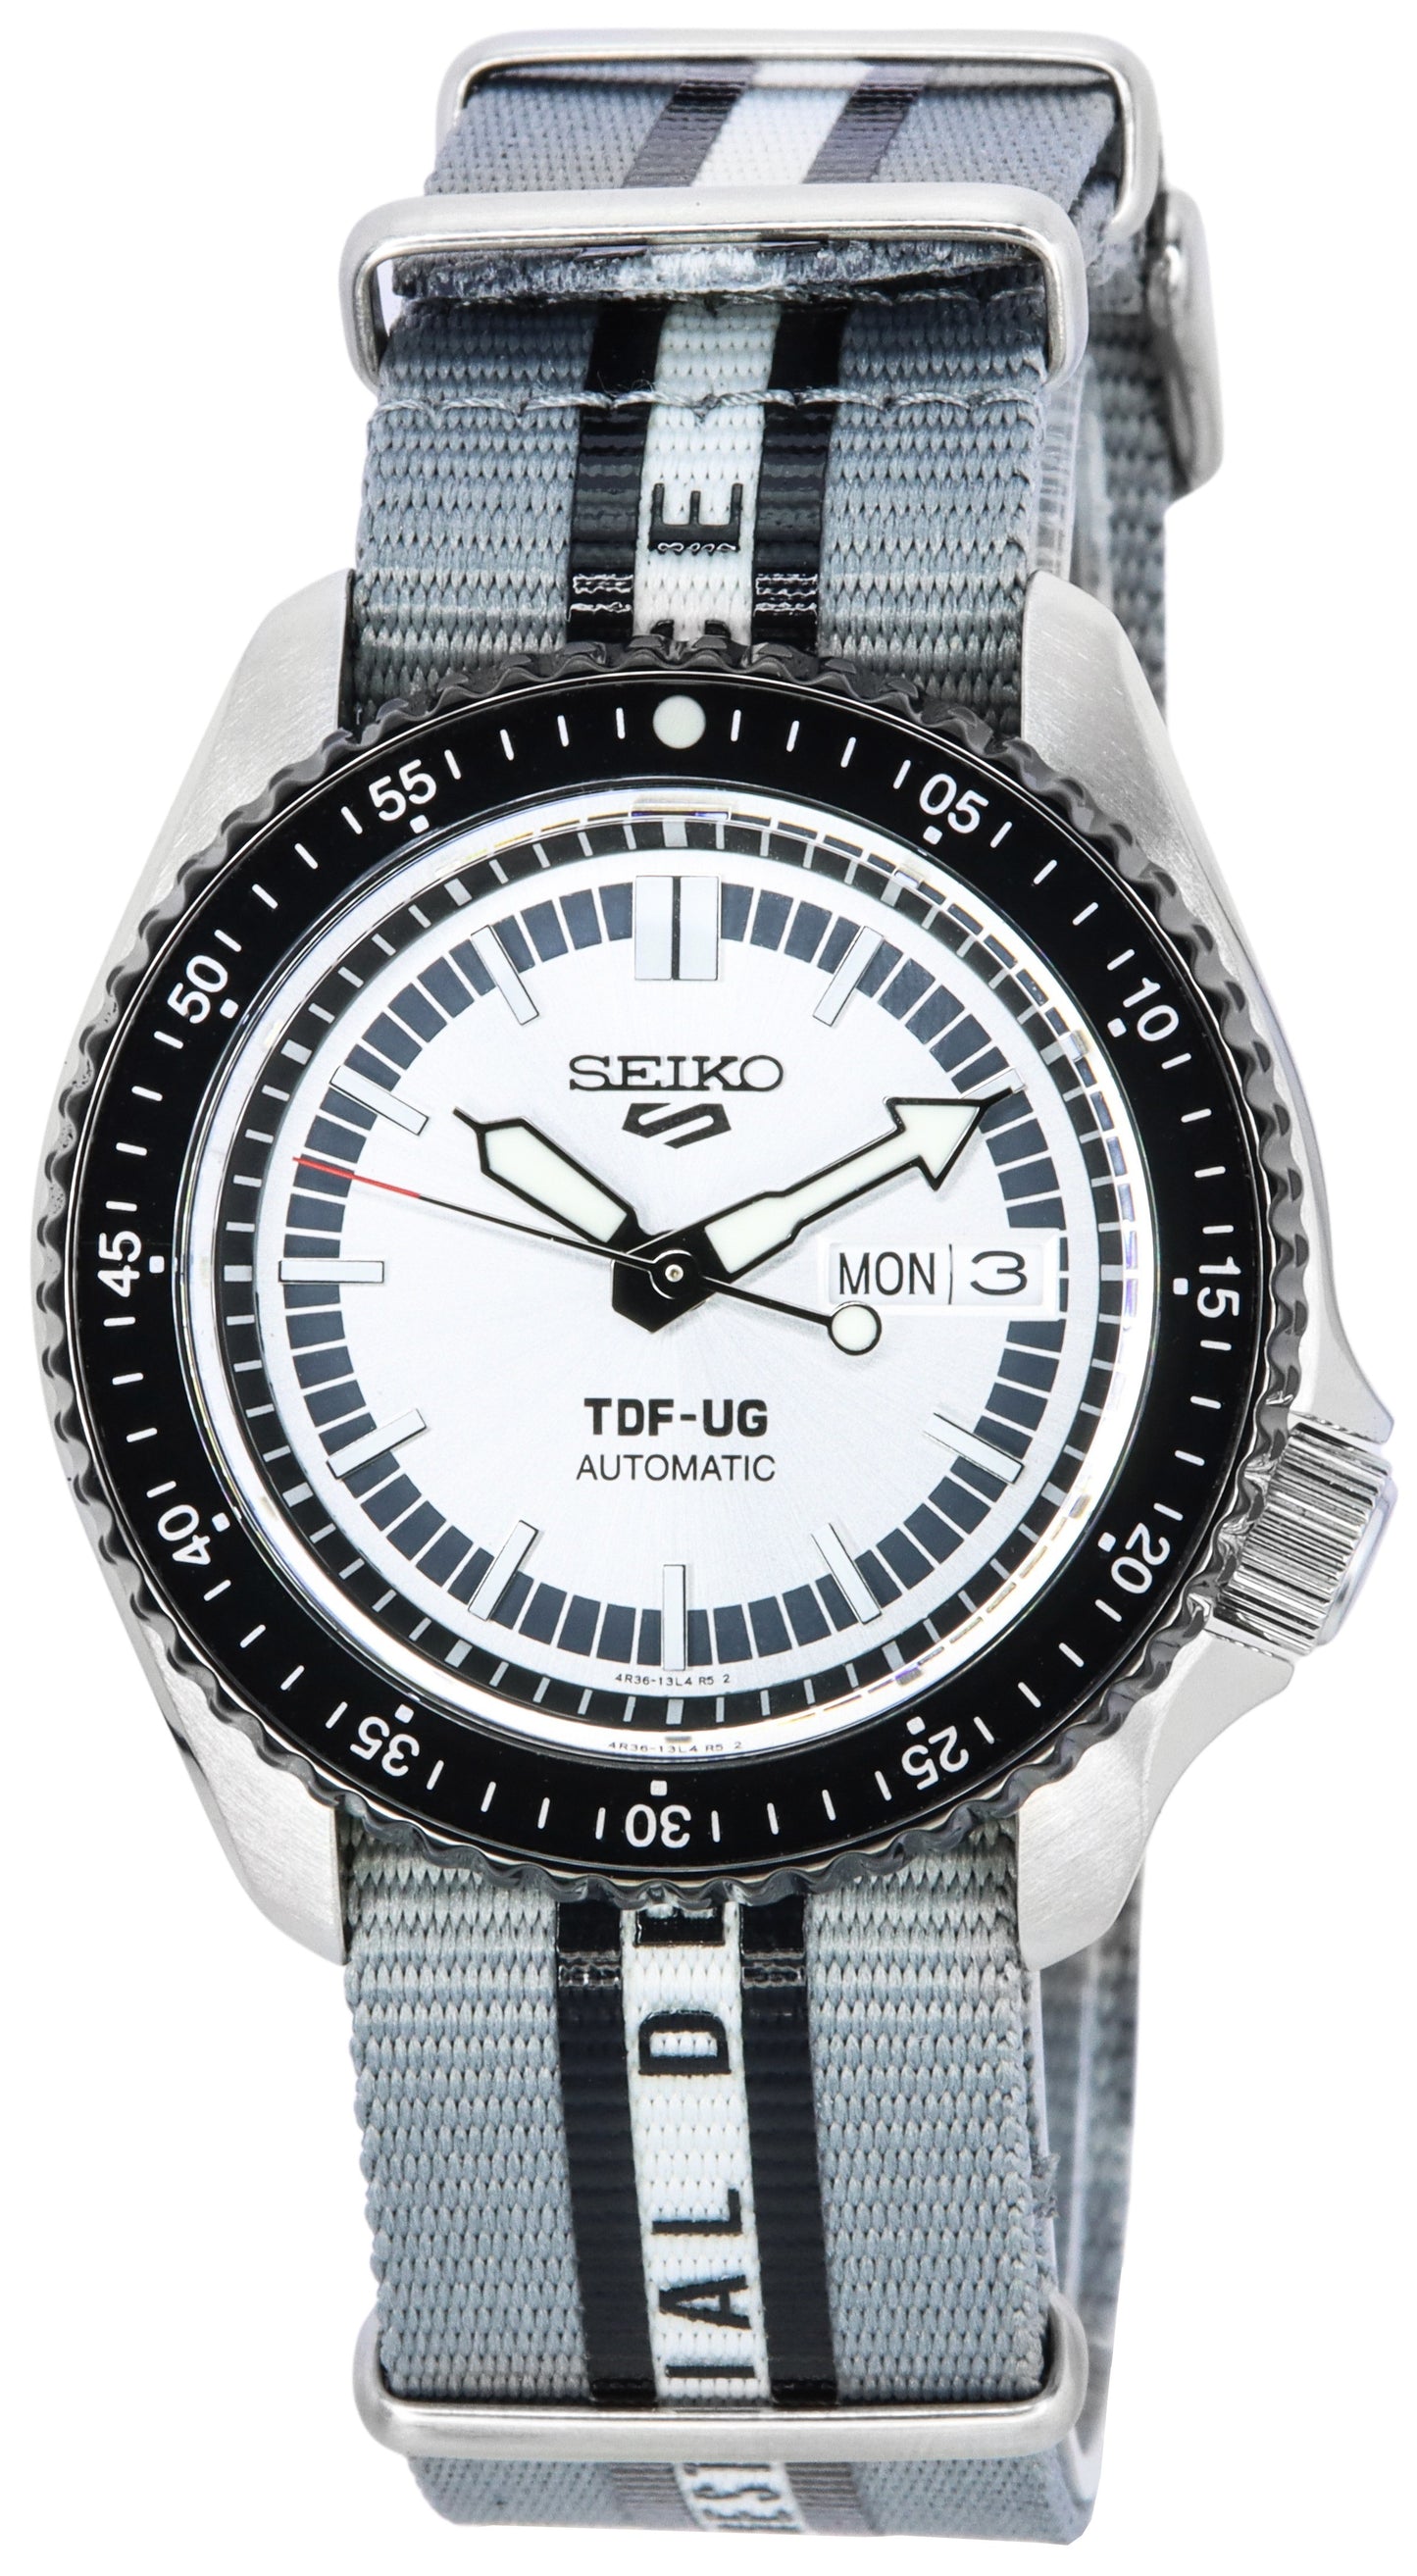 Seiko 5 Sports 55th Anniversary Ultraseven Limited Edition Automatic SRPJ79K1 100M Men's Watch